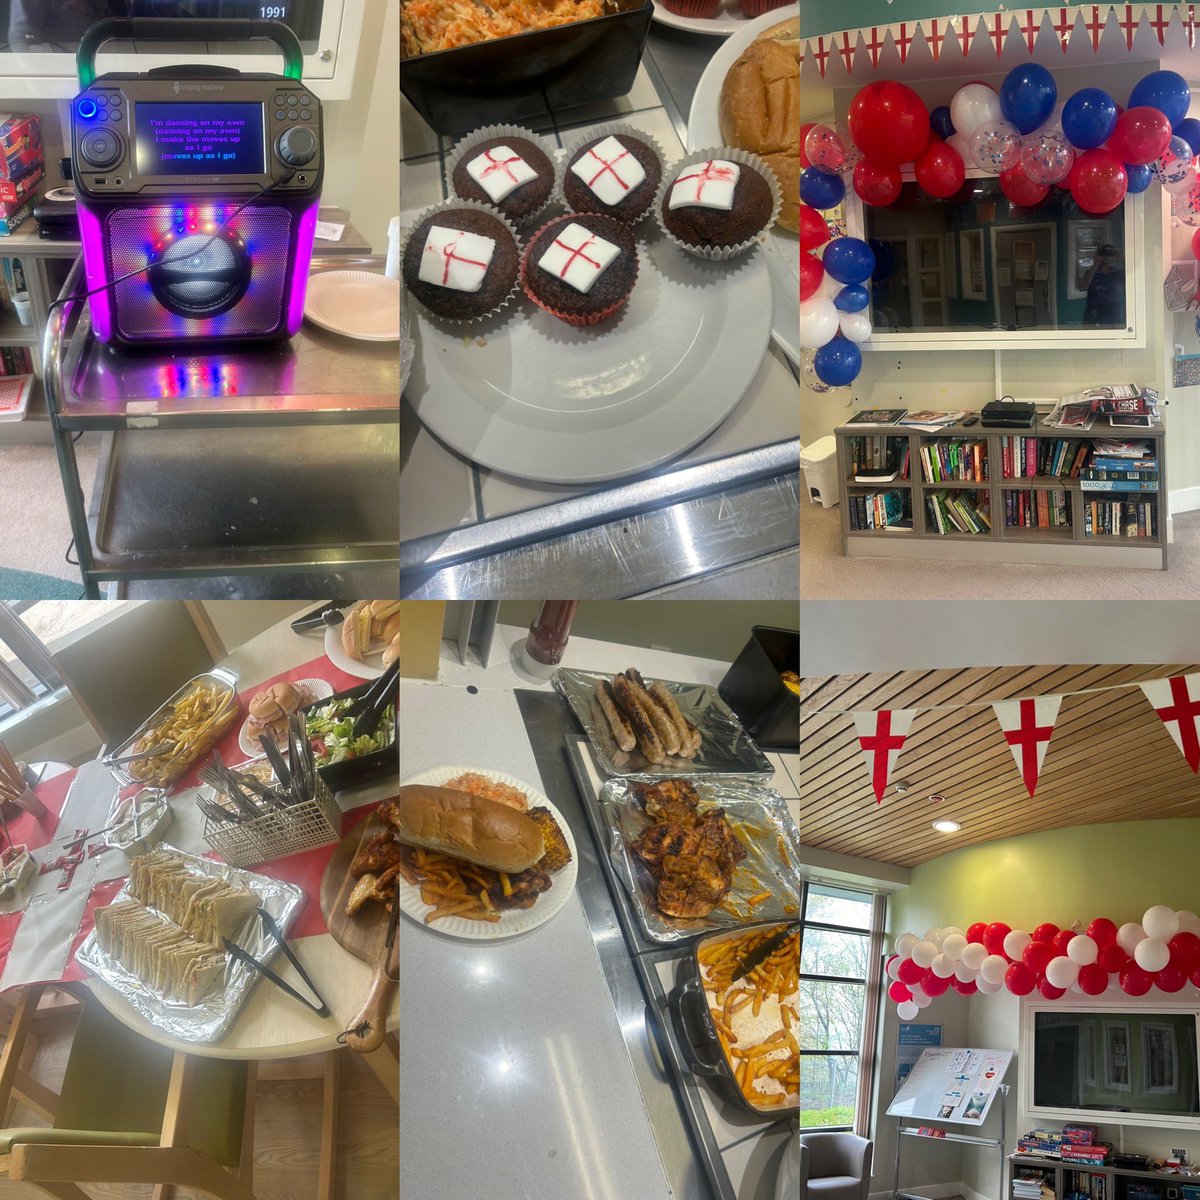 LSS St George’s day celebrations what a day we have had from beginning to end so much so much so,SU said “wish it was ST George’s day everyday I’ve had such a brill day thankyou” Total team effort @JosephOgbeide4 @BenStrongGMMH @LisaS823024566 @AmeliaGMMH @CathyLovatt1